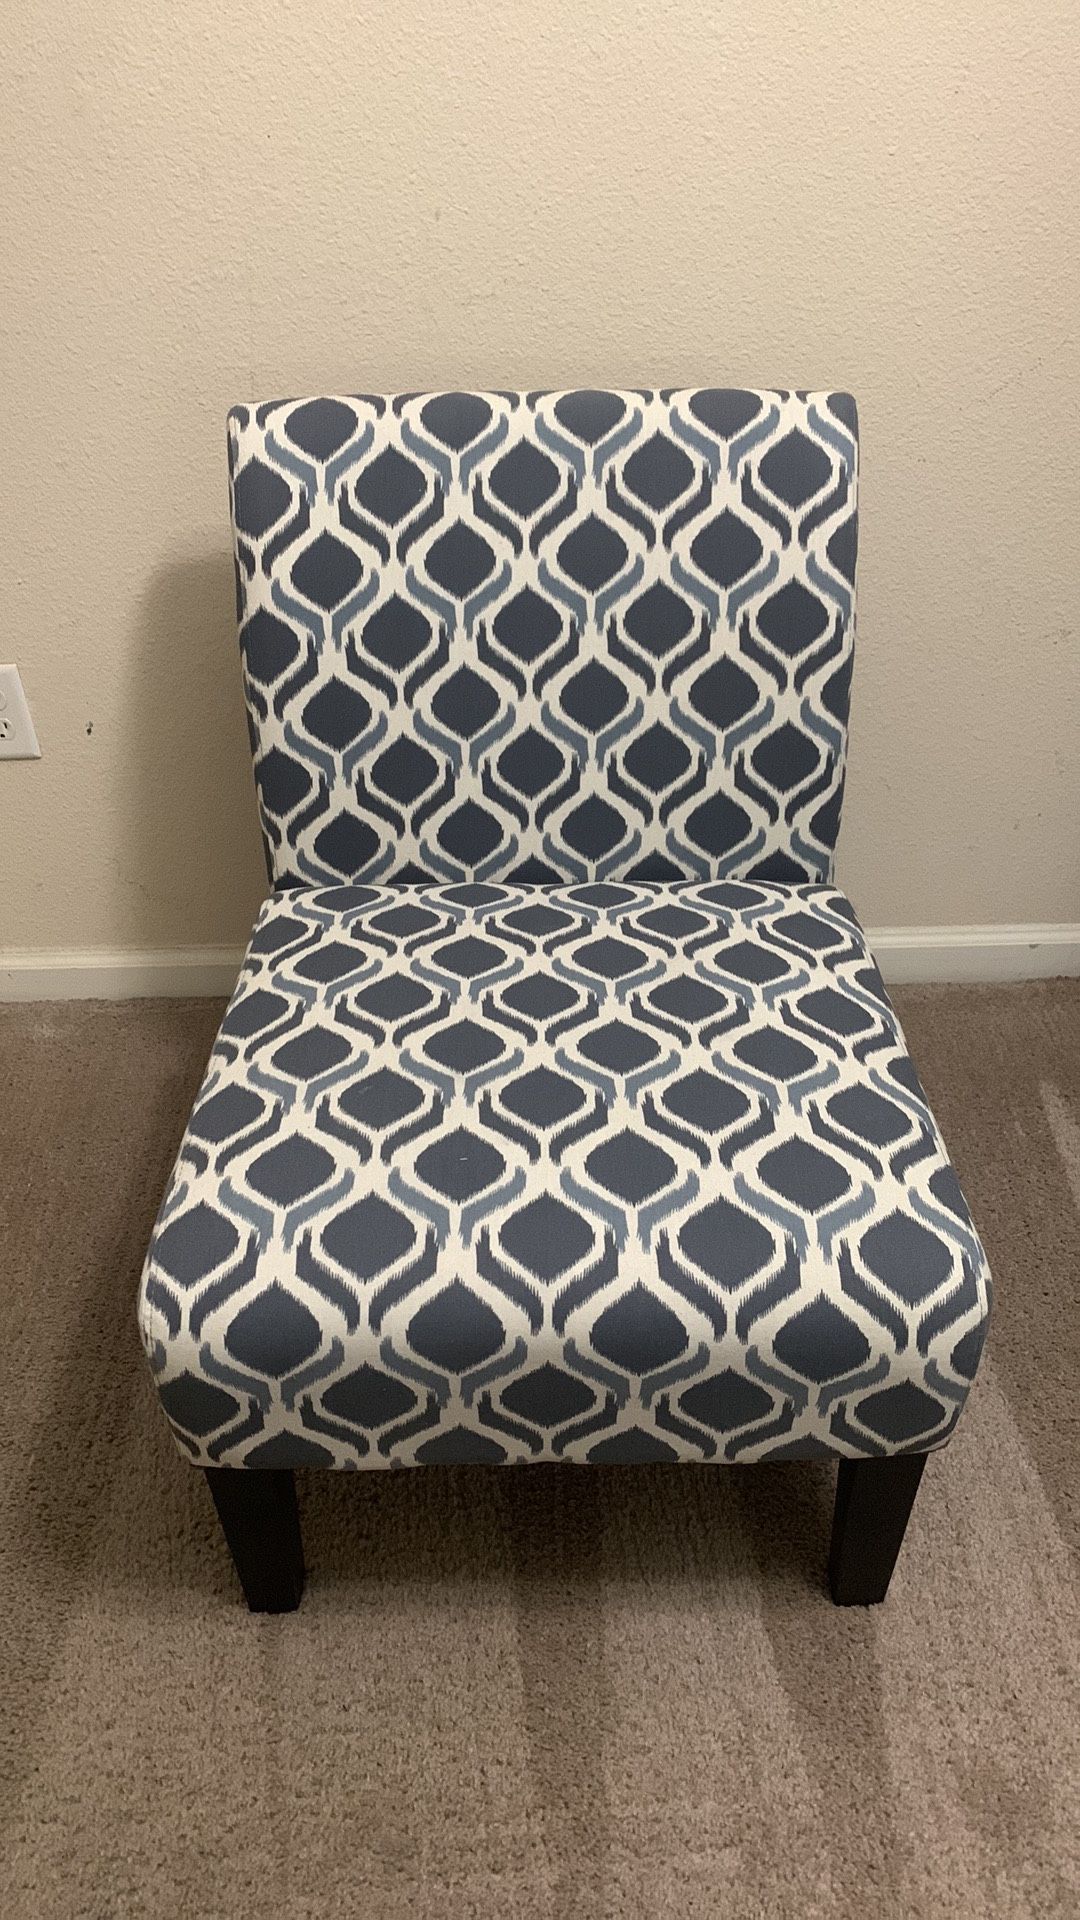 2 Sitting Chairs